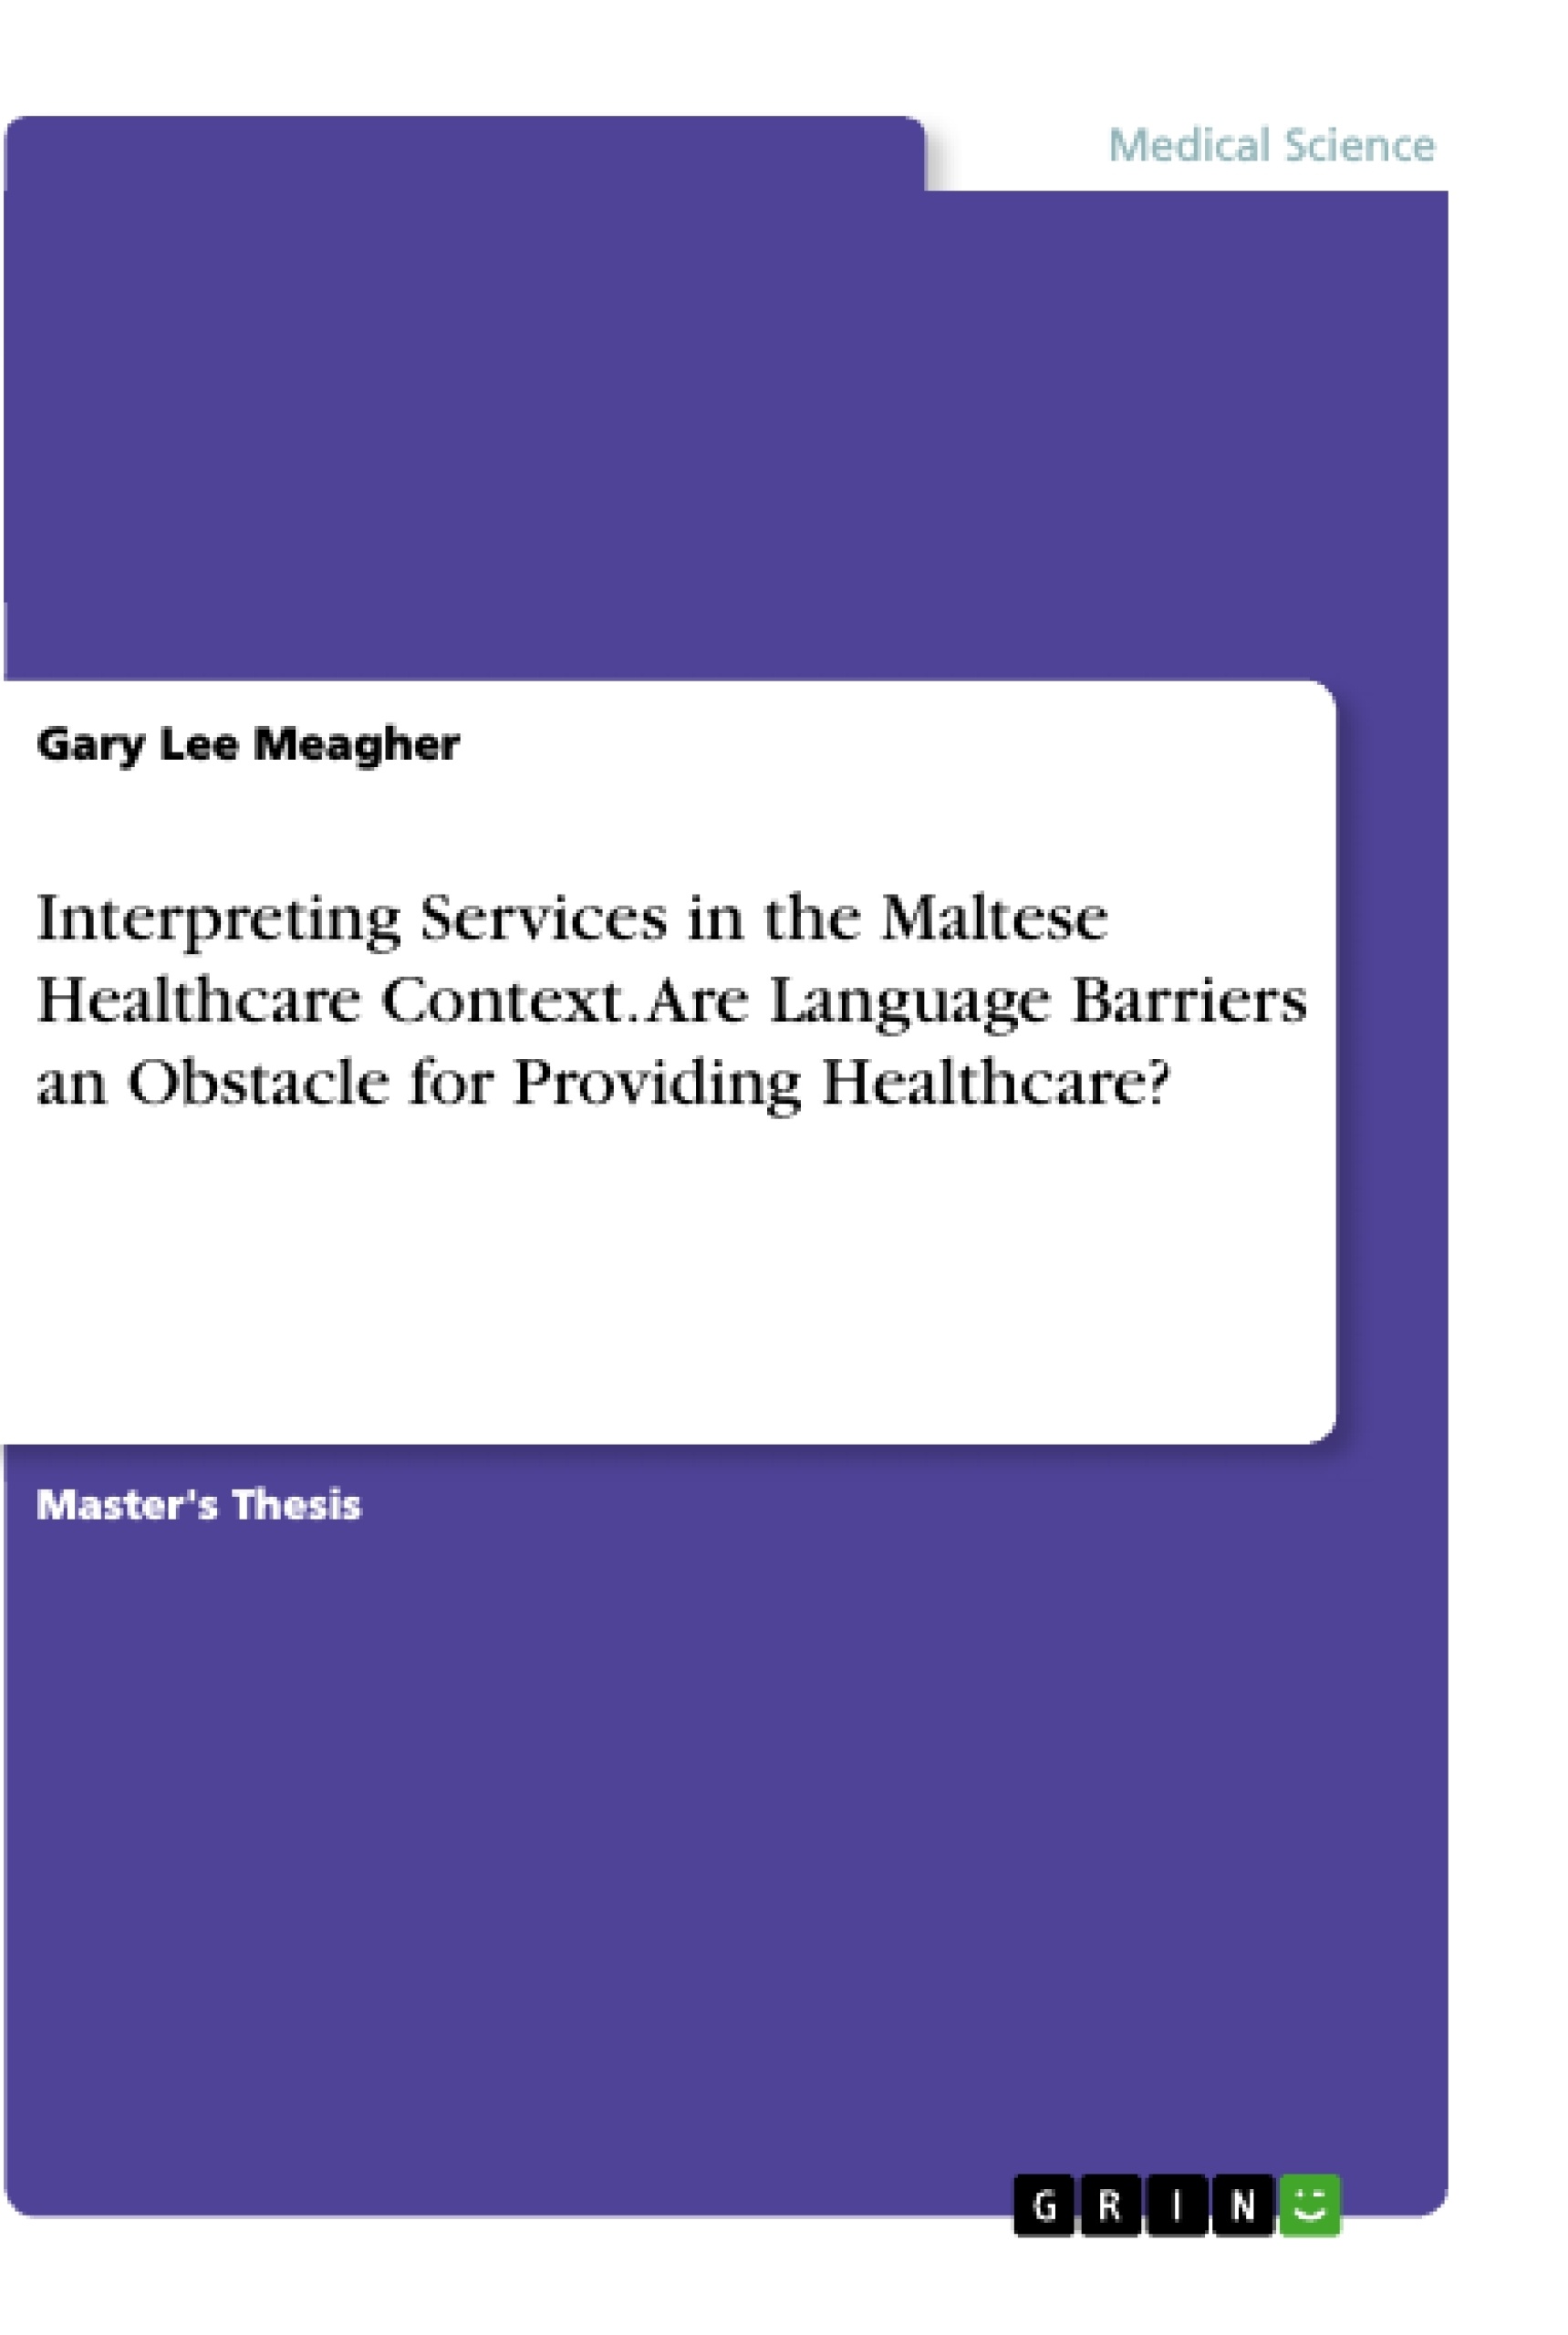 Maltese　for　Obstacle　in　an　Context.　Barriers　the　Language　Are　Healthcare　Services　Interpreting　GRIN　Providing　Healthcare?